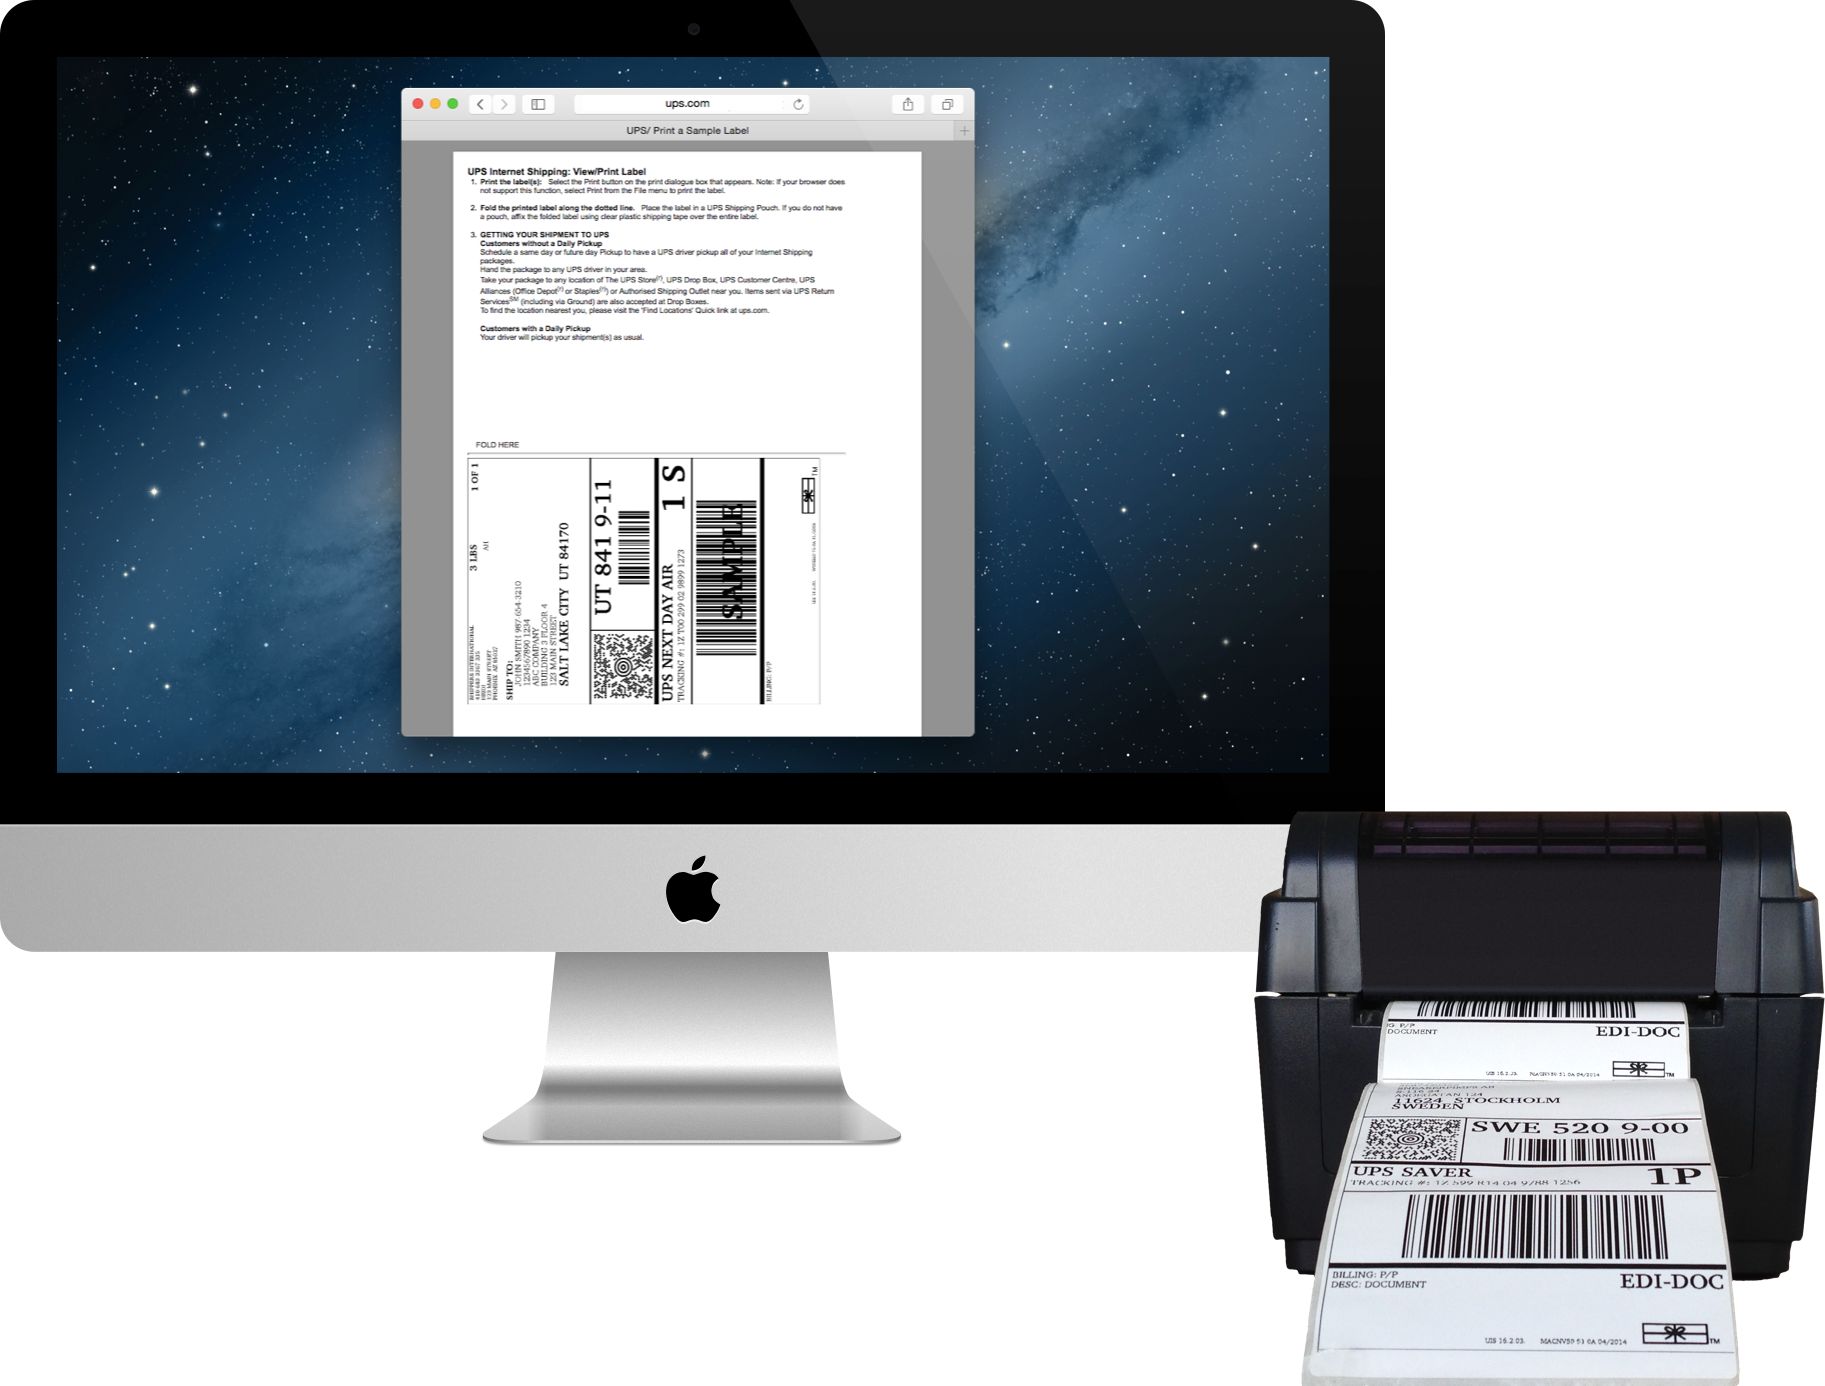 peninsula thermal printer driver for osx